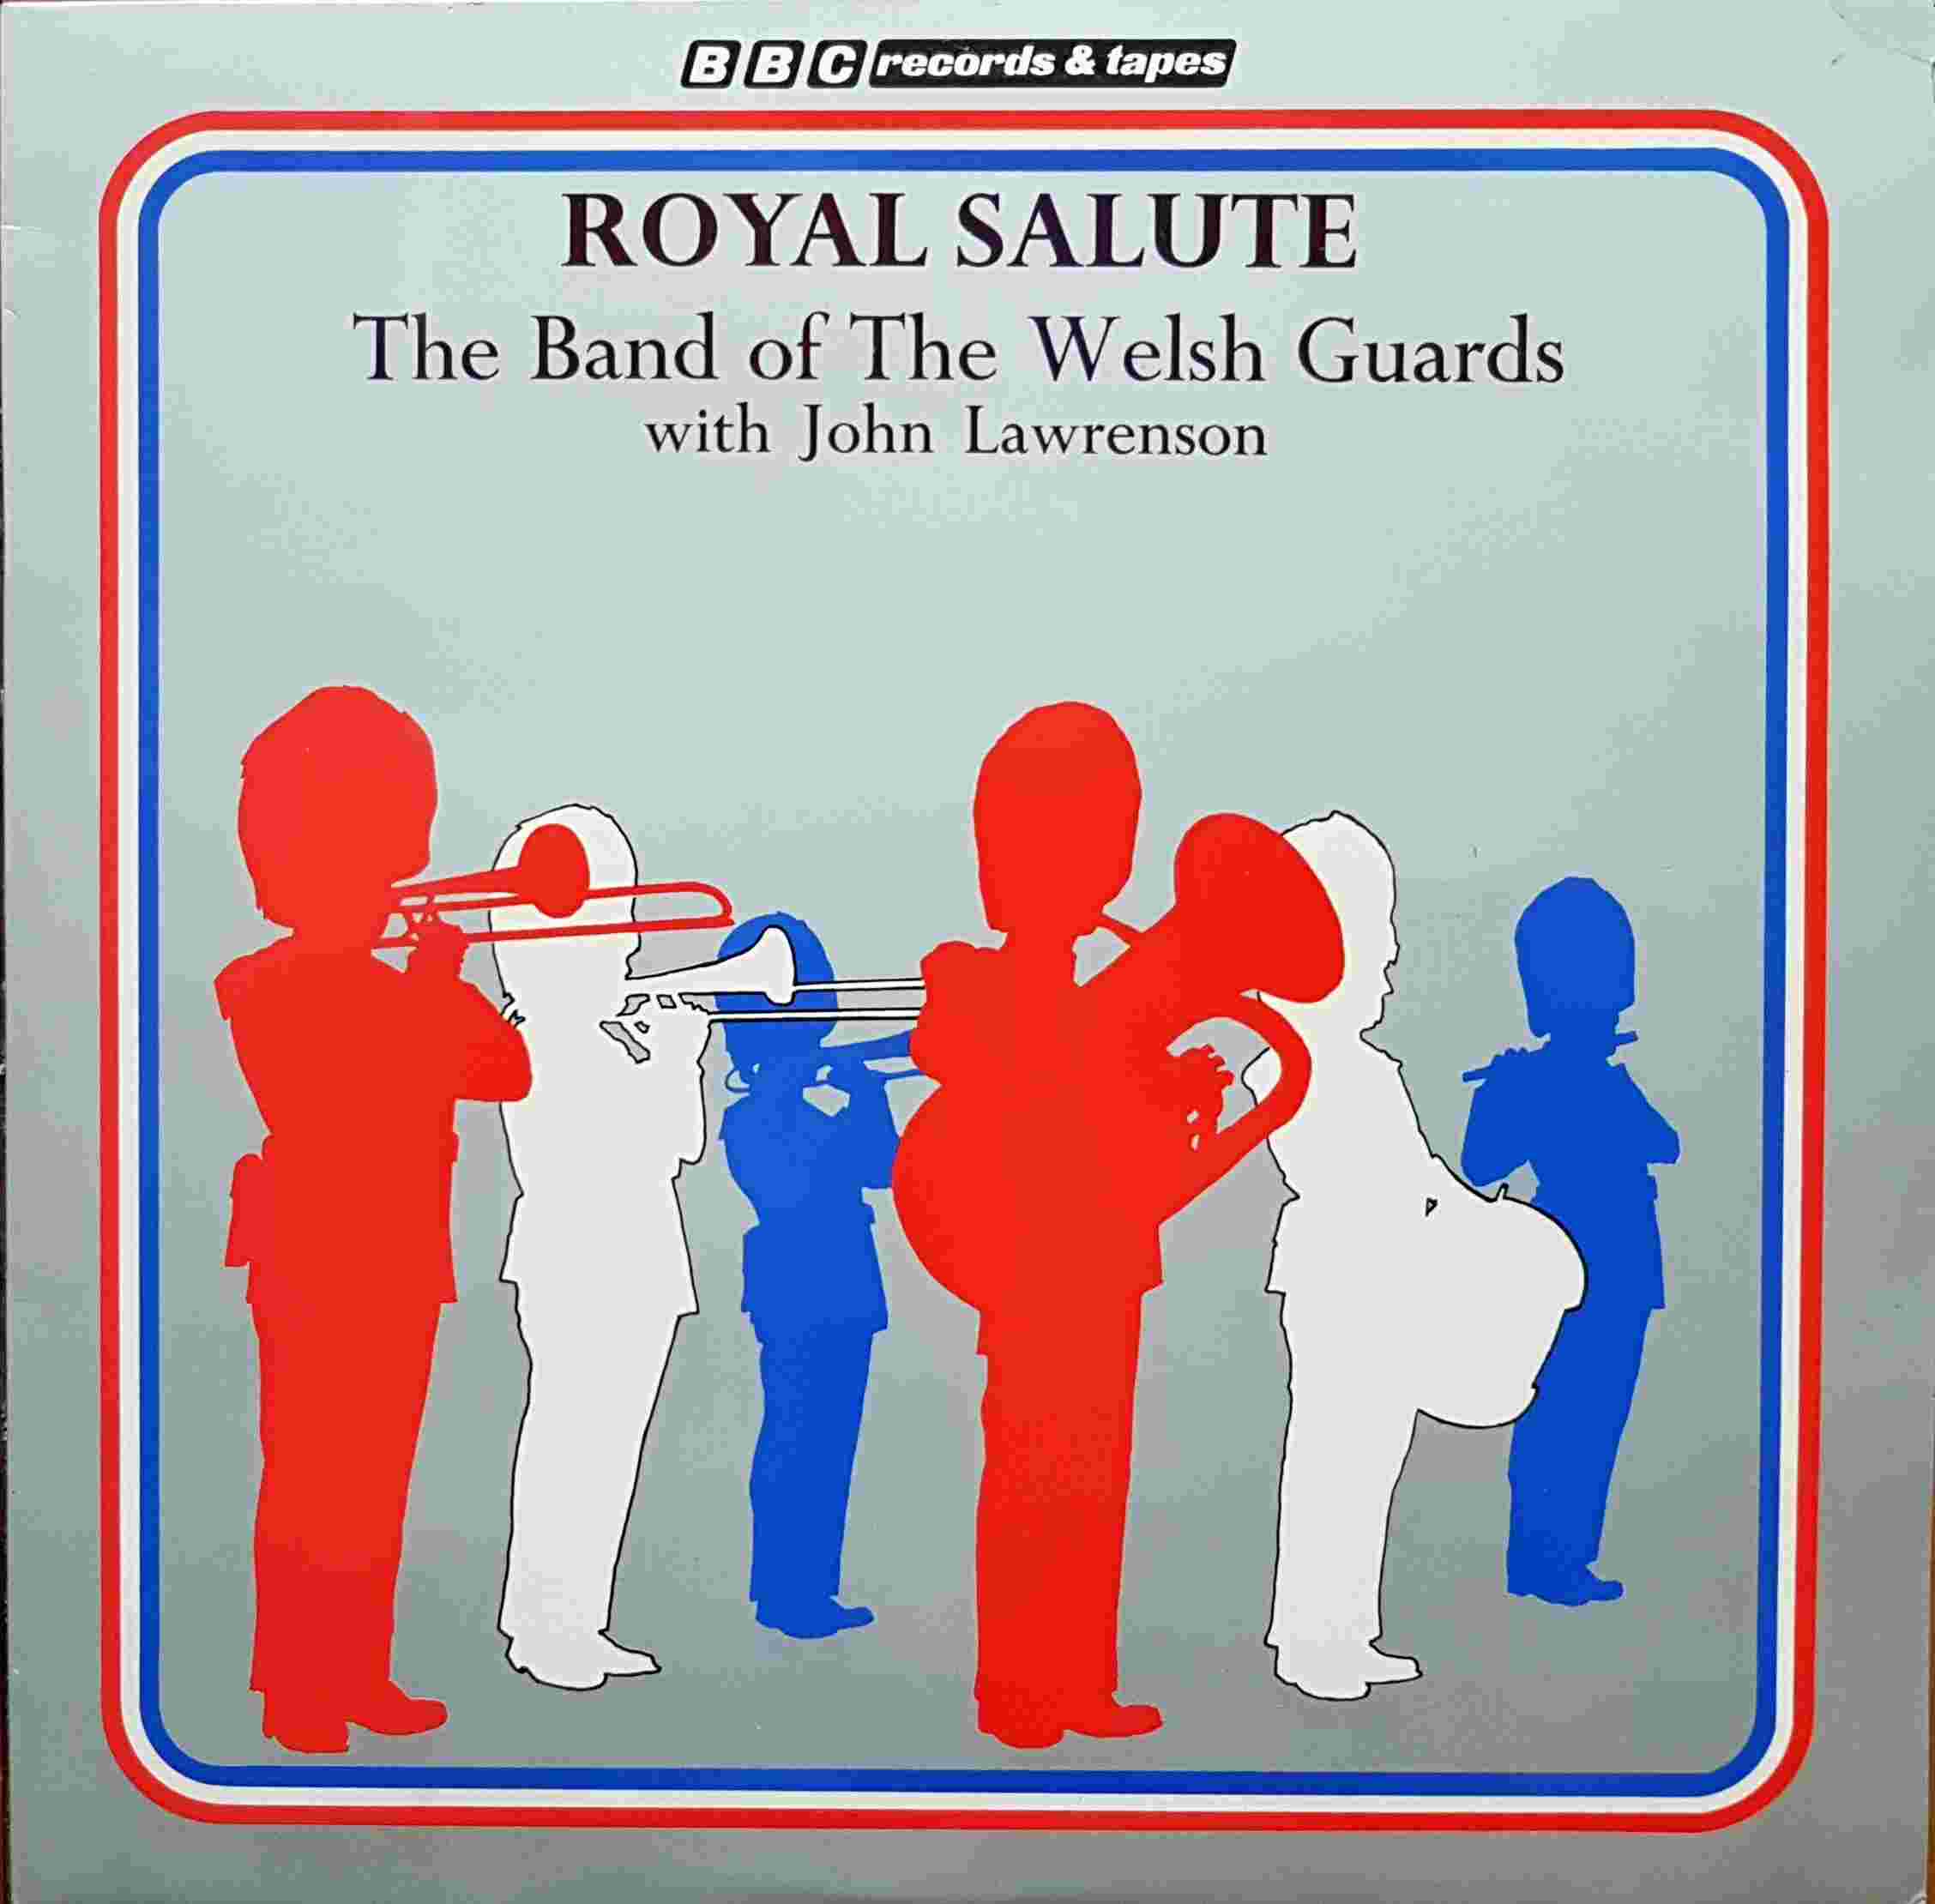 Picture of REB 274 The silver jubilee - Royal salute (The band of The Welsh Guards) by artist Various from the BBC albums - Records and Tapes library